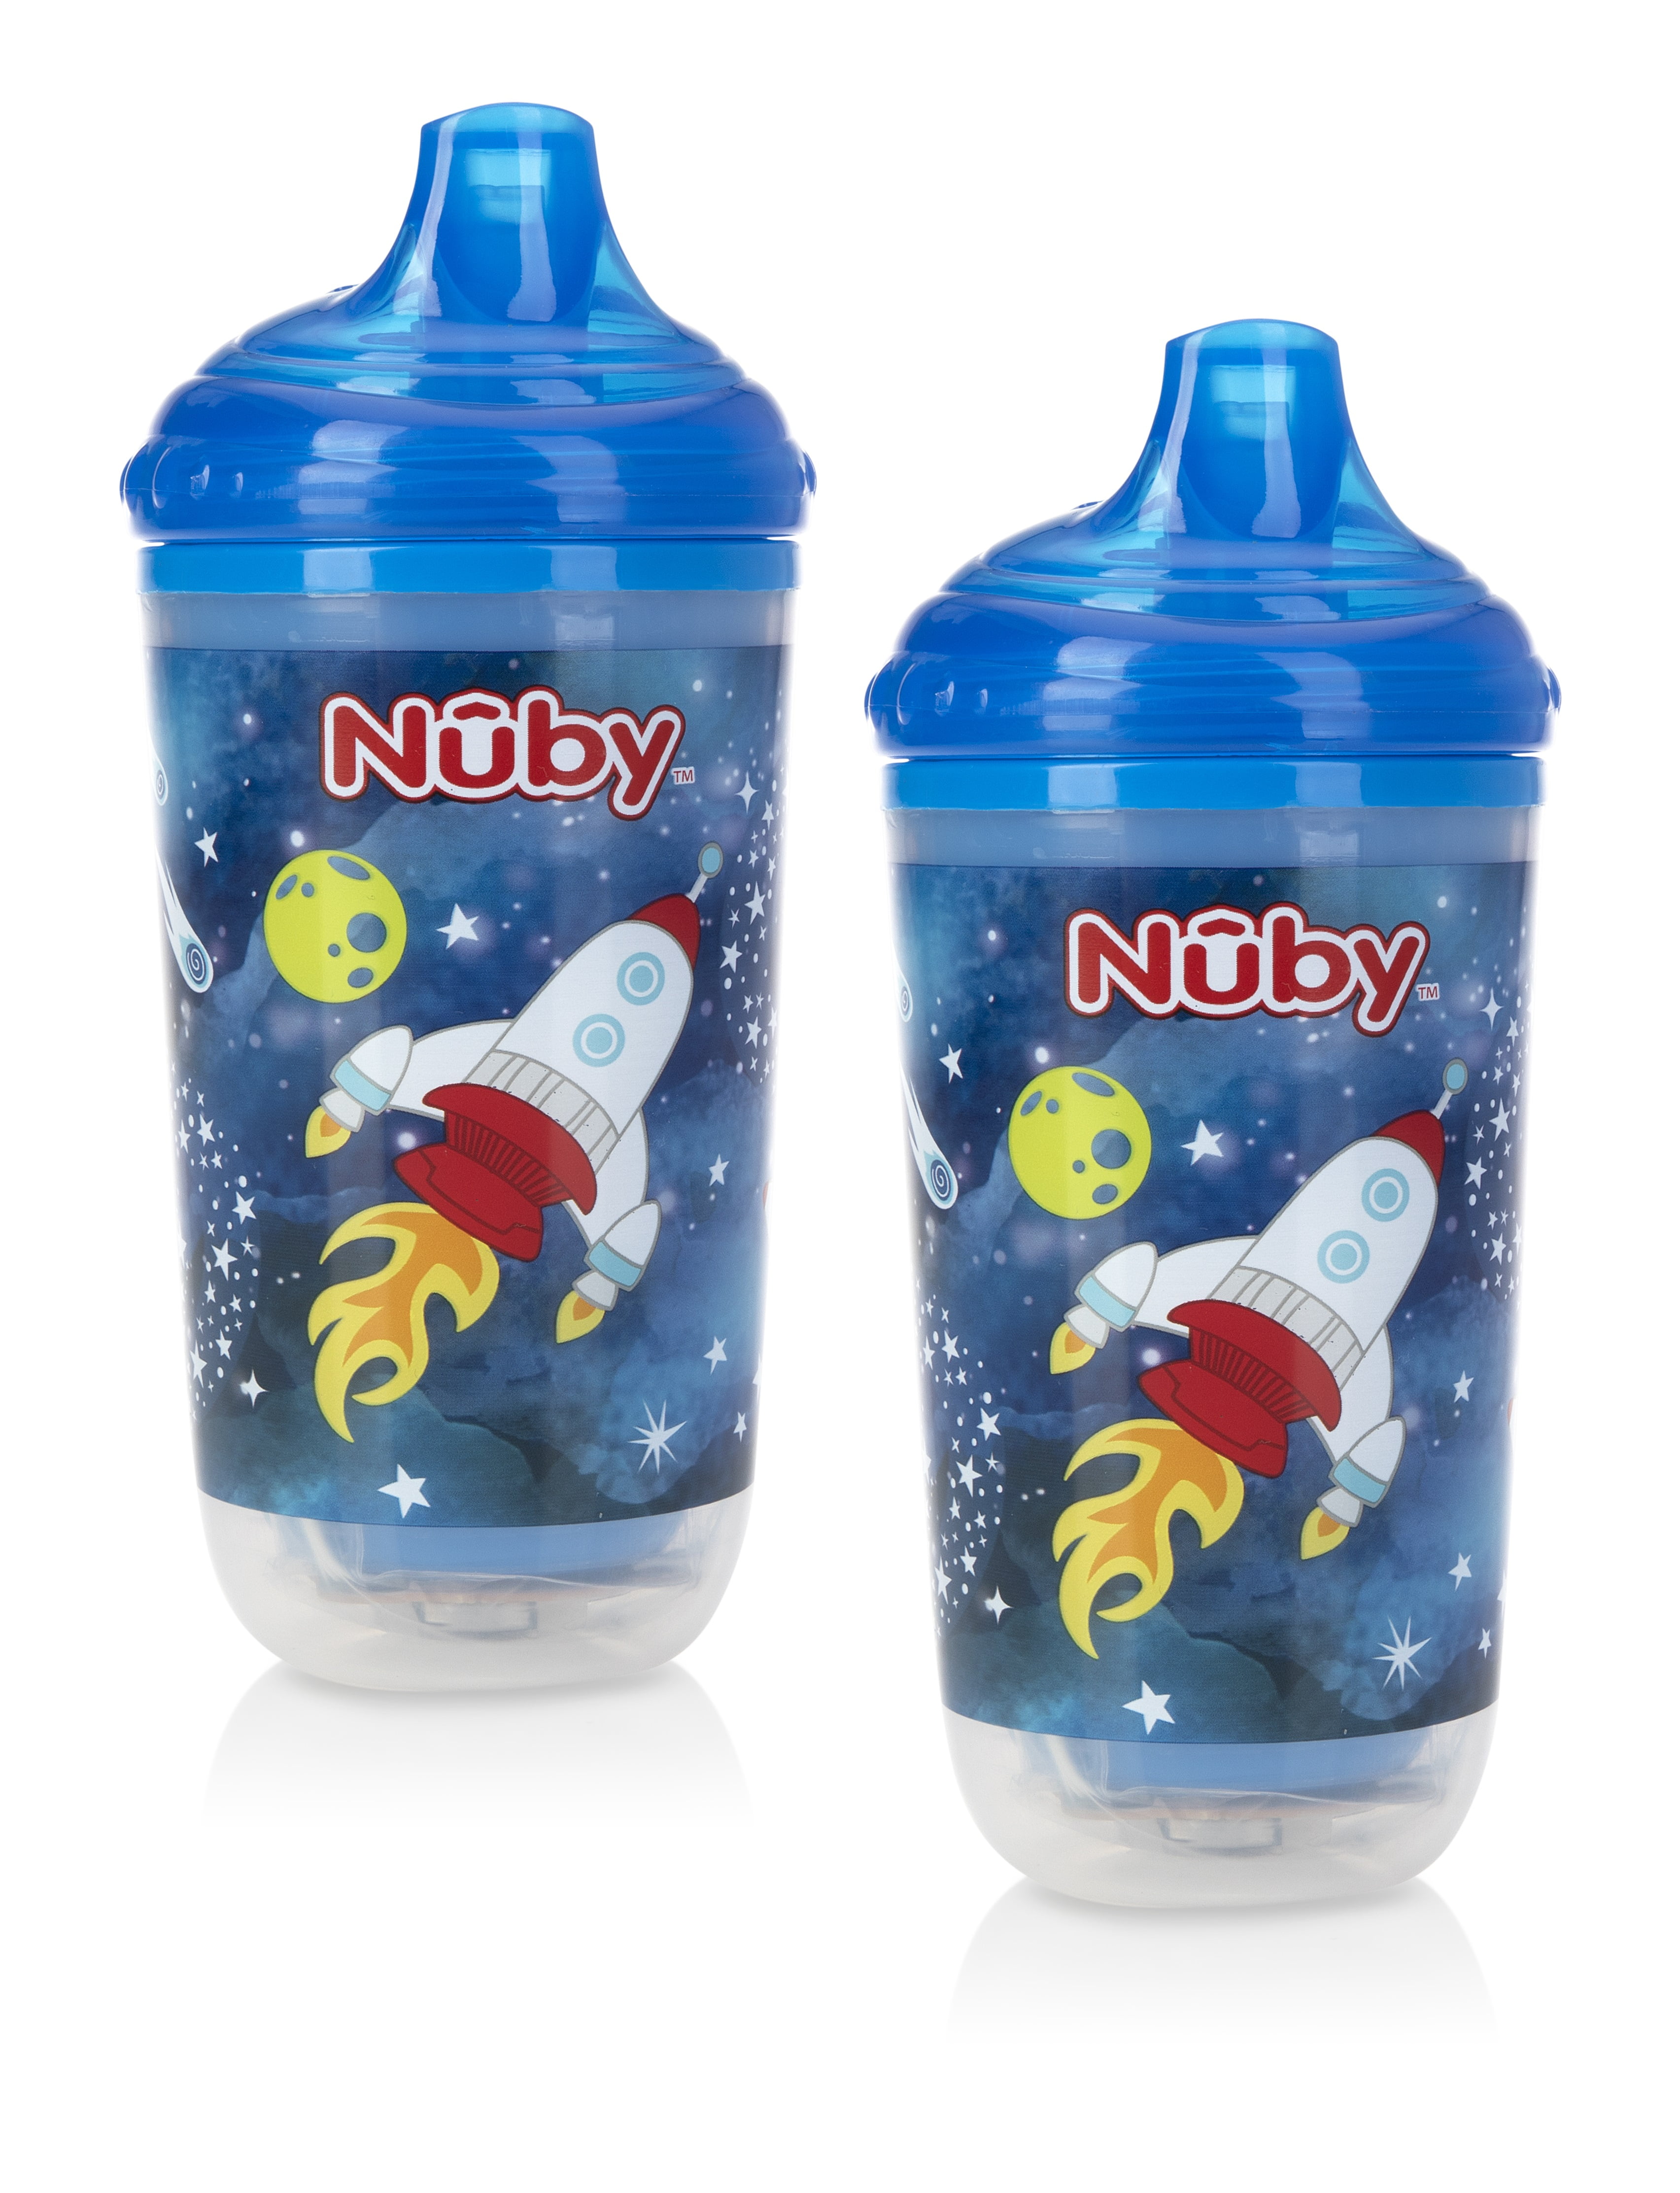 Nuby No-Spill Cup With Flexi Straw 10 oz, 2 pk (More Colors